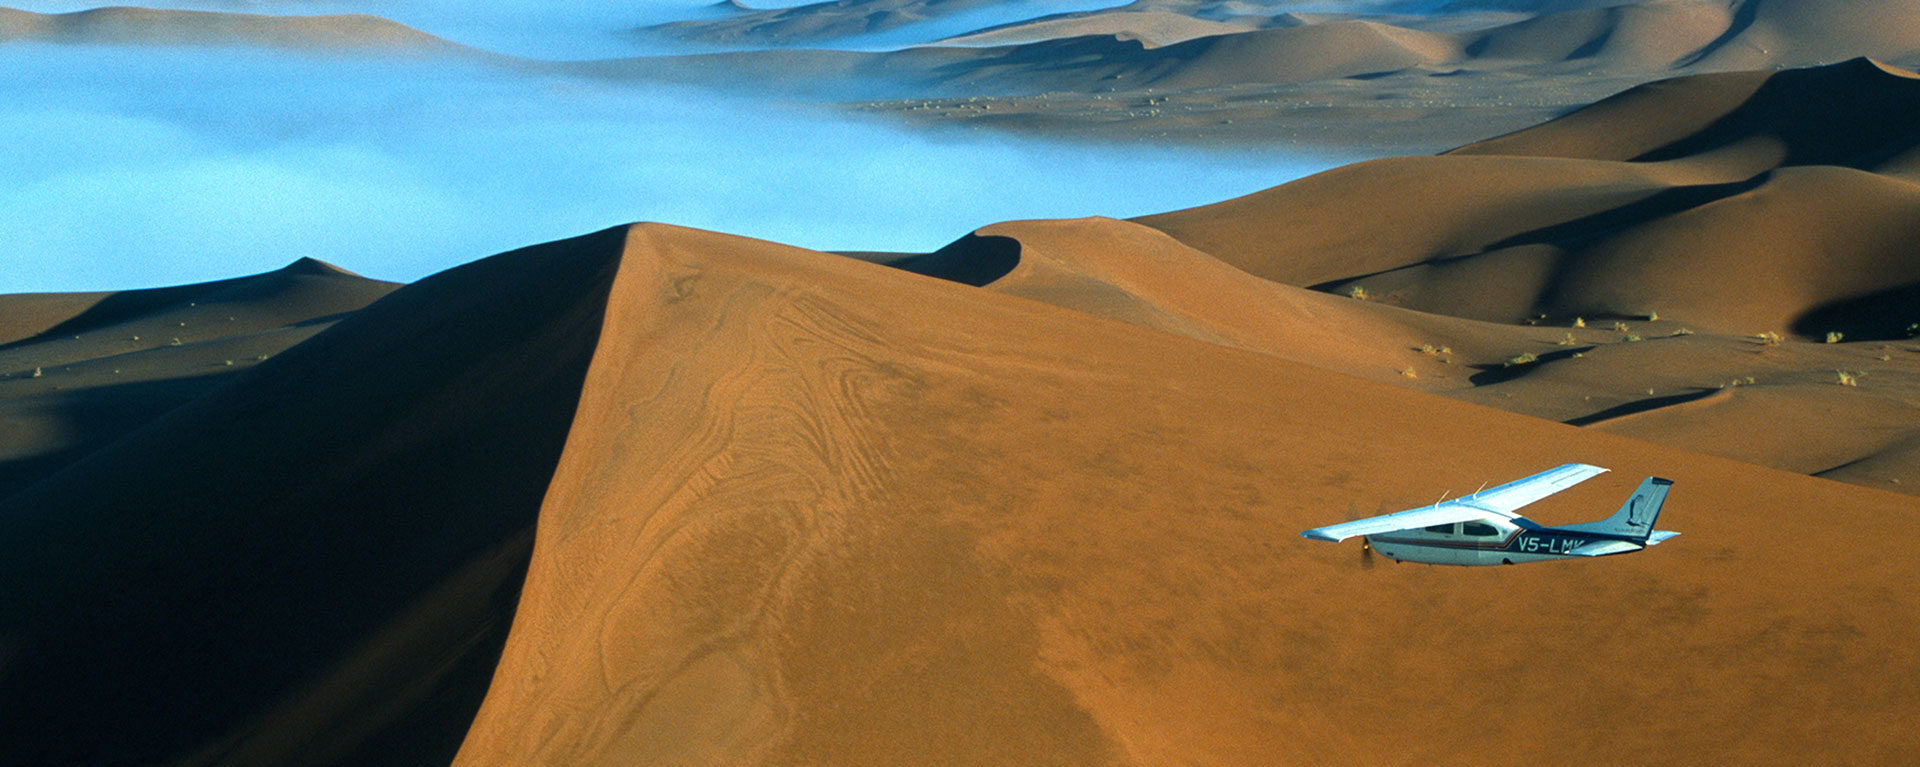 Safari flights over red sand dunes of Sossusvlei with early morning mist, Namib-Naukluft National Park, Namibia.